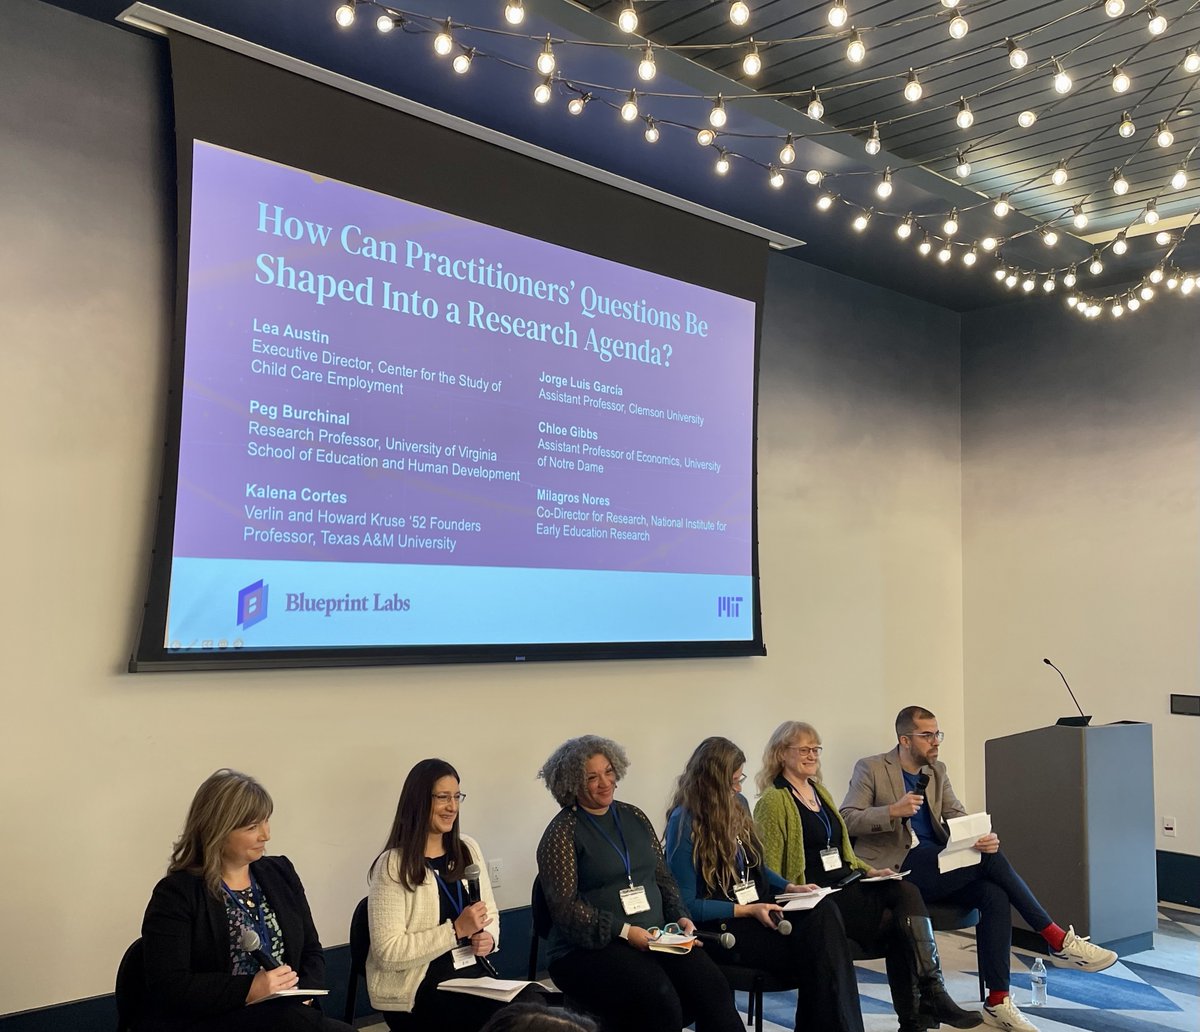 How can practitioners’ questions be shaped into a research agenda? On Day 2 of Blueprint’s Preschool Research Convening, a panel of top early education researchers is discussing pressing topics in the preschool space and various approaches and challenges to studying them.